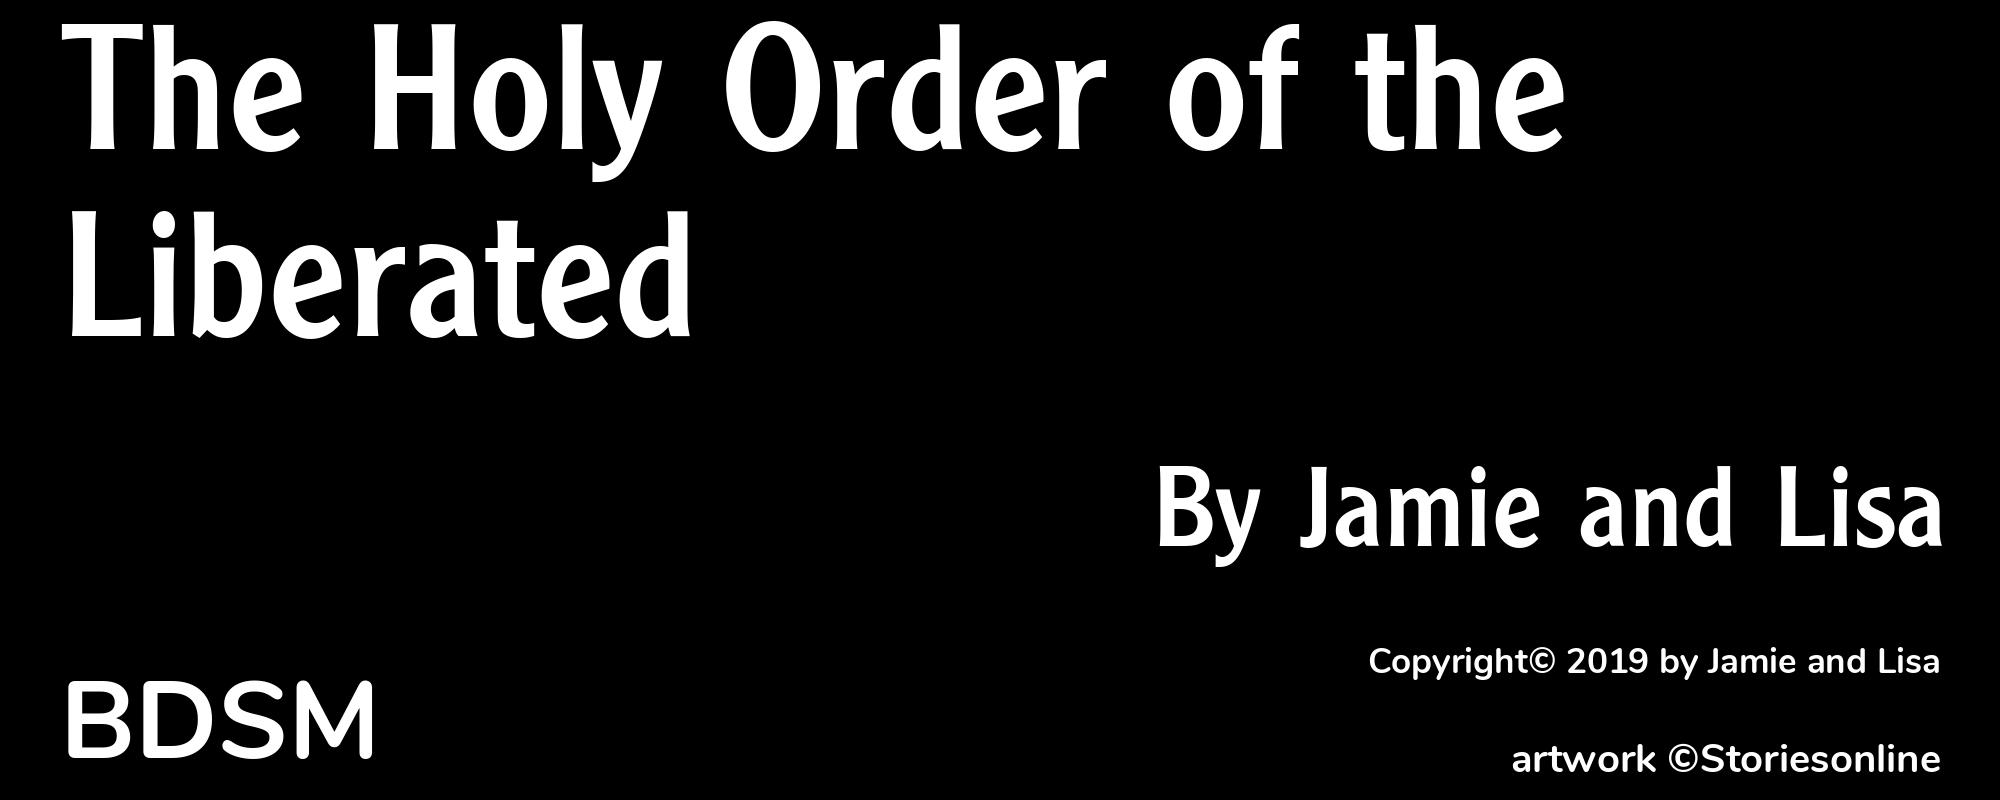 The Holy Order of the Liberated - Cover